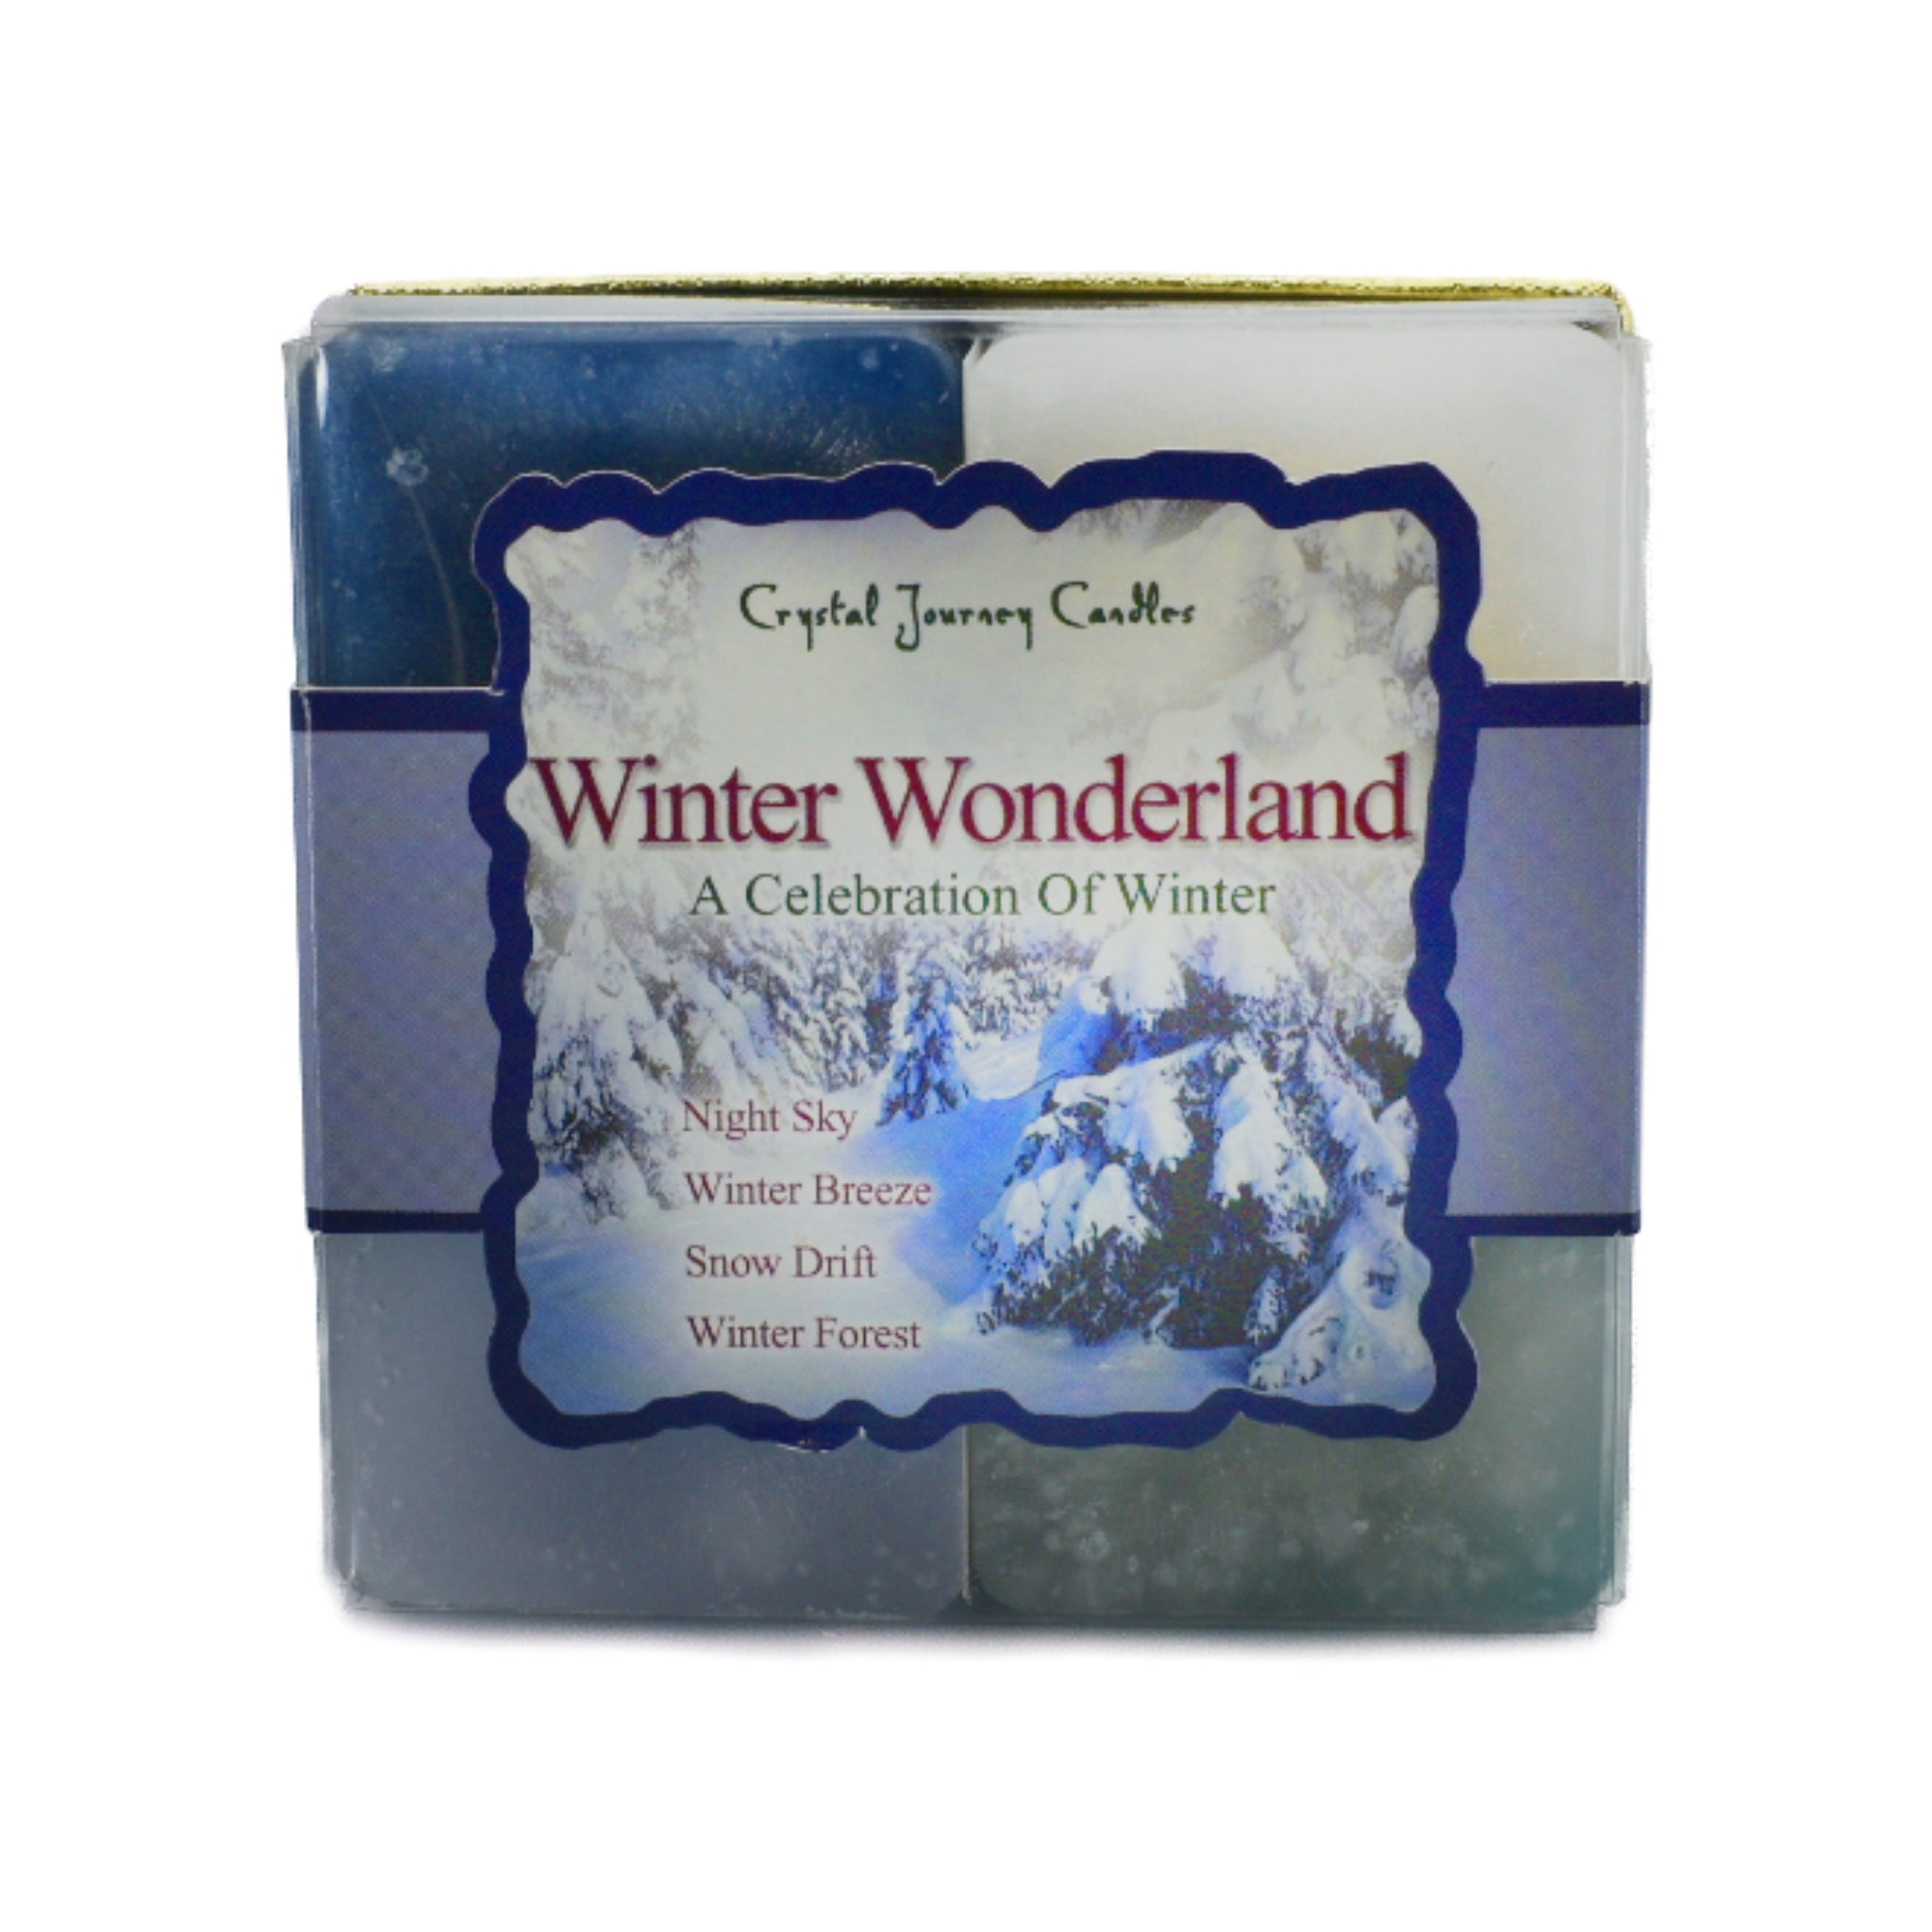 Winter Wonderland Square Pack Candle.  Winter wonderland is a celebration of winter.  Candles are scented as night sky, winter breeze, snow drift and winter forest.  